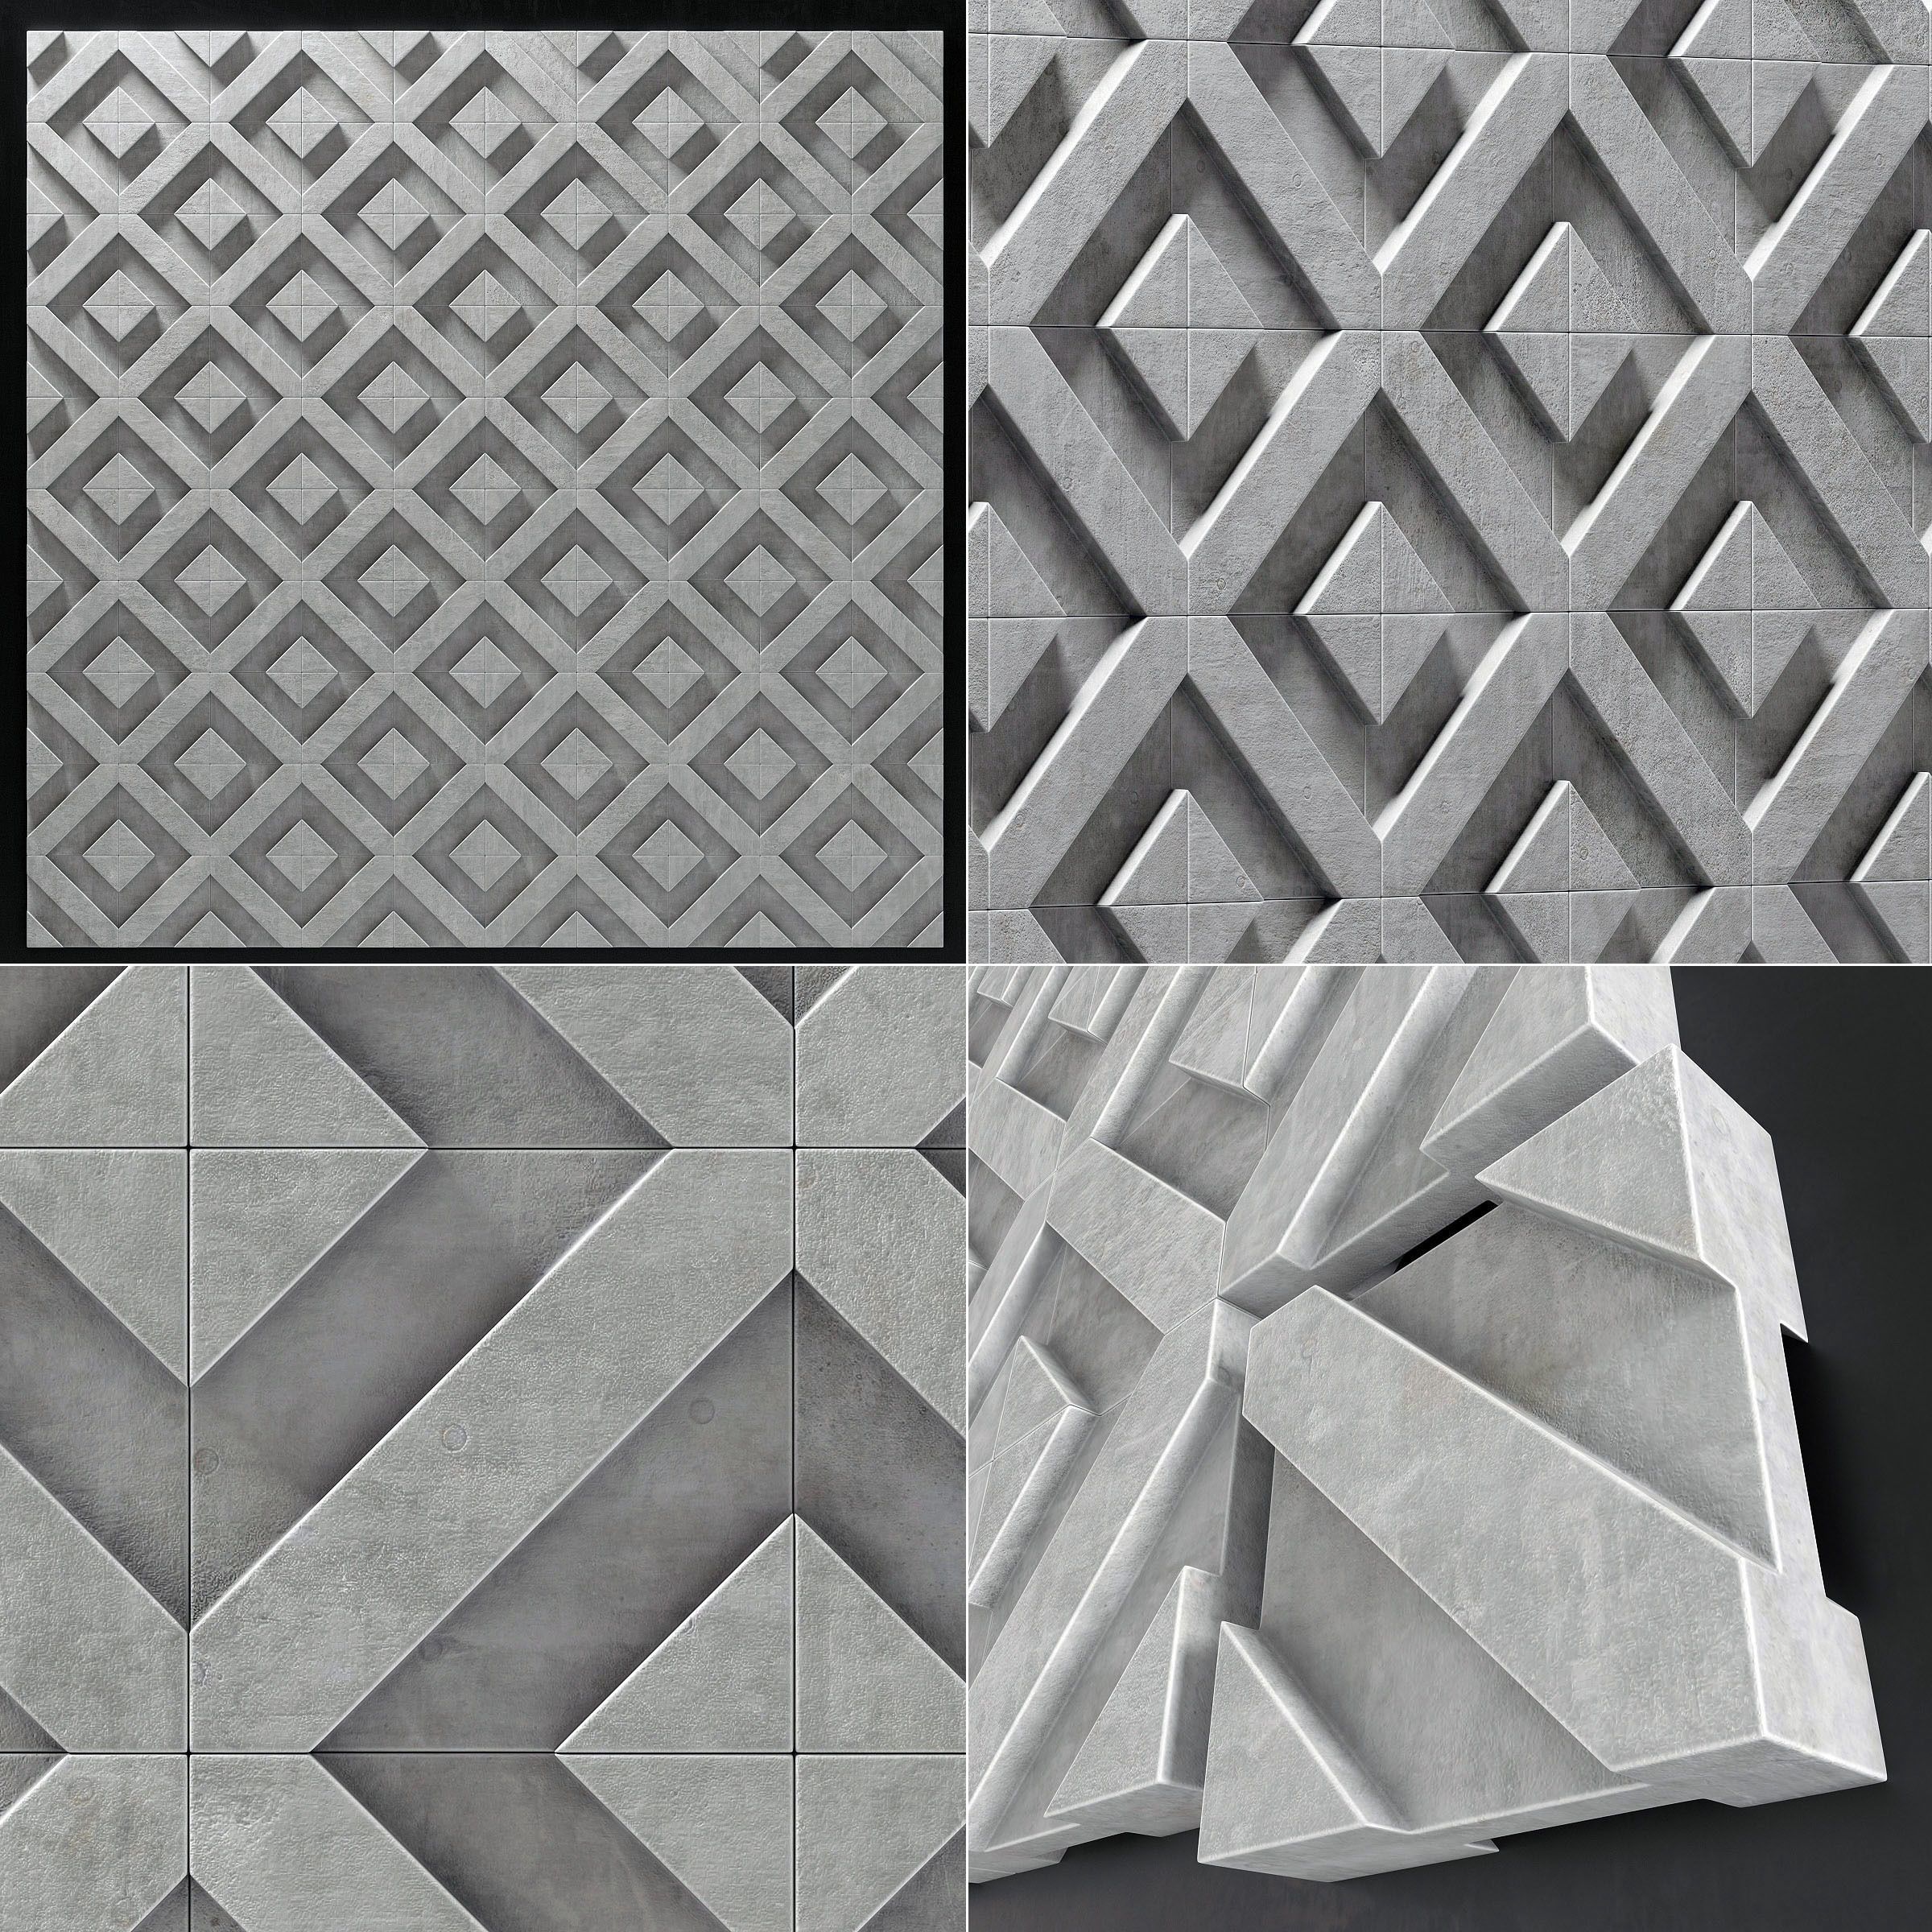 3d Wall Decor Concrete Tile Line Big N2 | Cgtrader Inside Recent Concrete Wall Art (View 5 of 20)